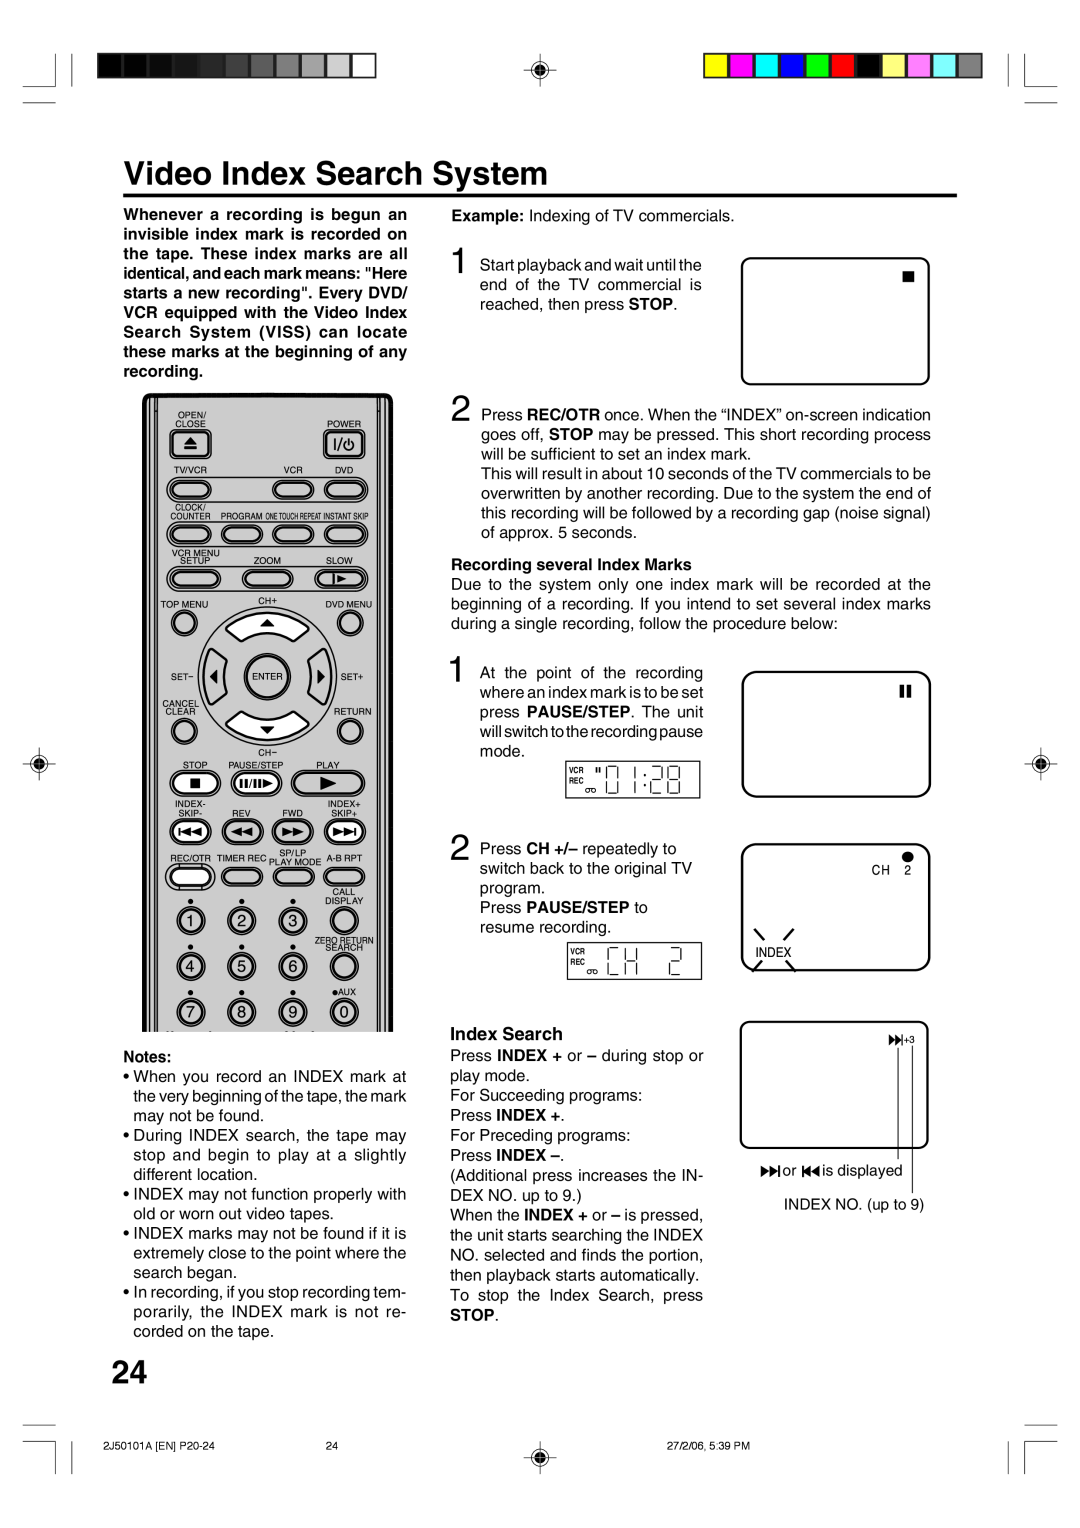 Toshiba SD-37VBSB manual Video Index Search System, Recording several Index Marks, Press PAUSE/STEP to resume recording 